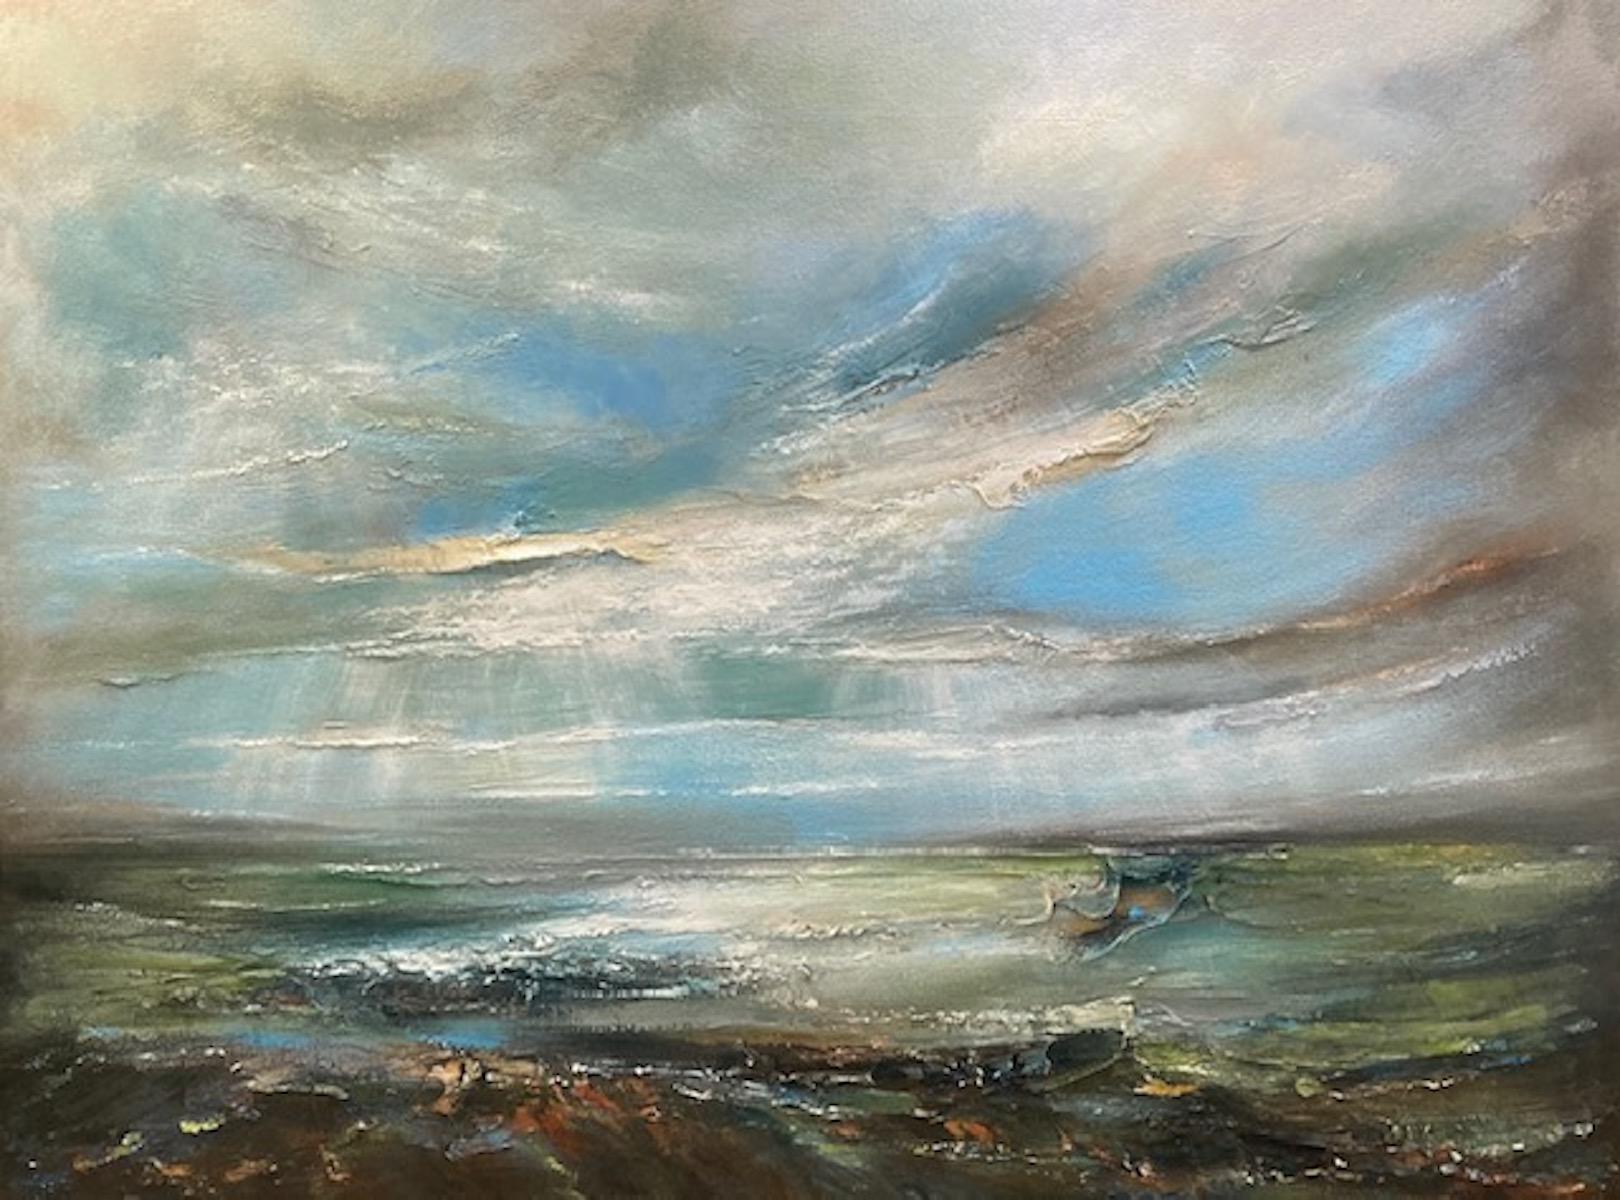 Tidal Retreat by Helen Howells[2022]
original and hand signed by the artist 
Oil on Canvas
Image size: H:76 cm x W:102 cm
Complete Size of Unframed Work: H:76 cm x W:102 cm x D:3.5cm
Sold Unframed
Please note that insitu images are purely an